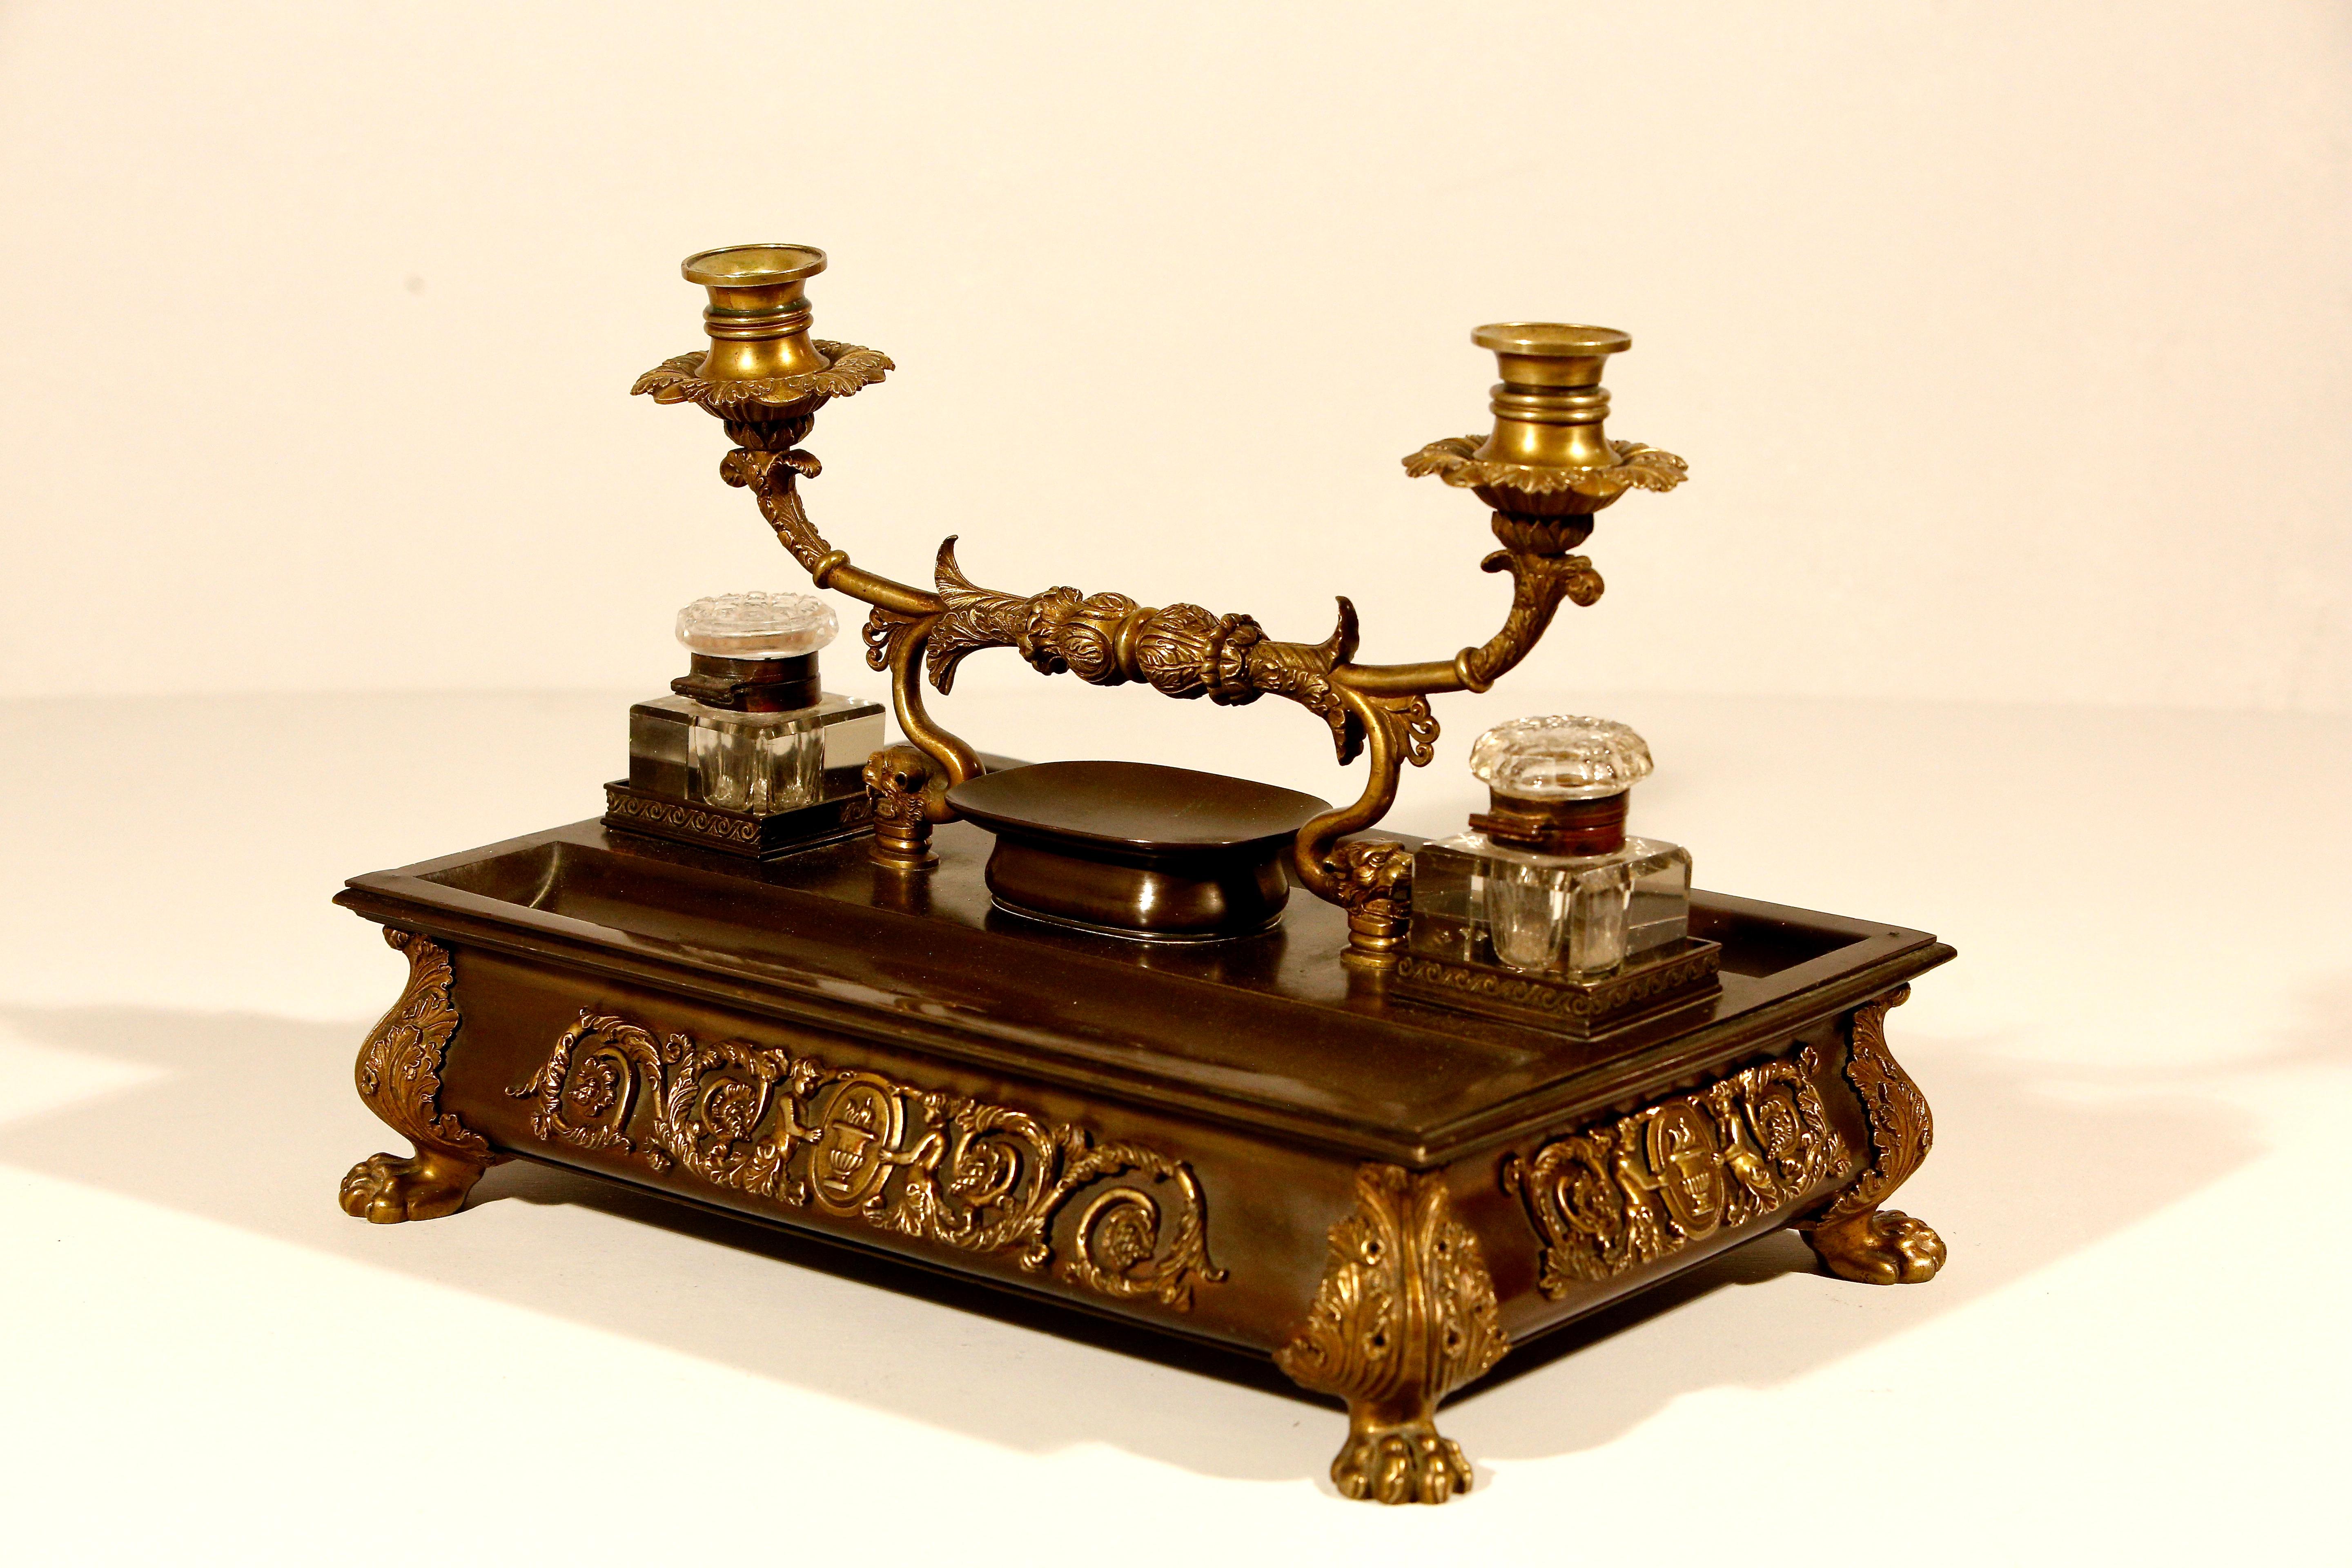 A large and impressive early 19c French bronze and gilt bronze inkwell, the central chased handle with a pair of candle arms terminating in lion masks, 2 tray wells either side of a raised dish with 2 cut glass inkwells supported on a shaped bronze